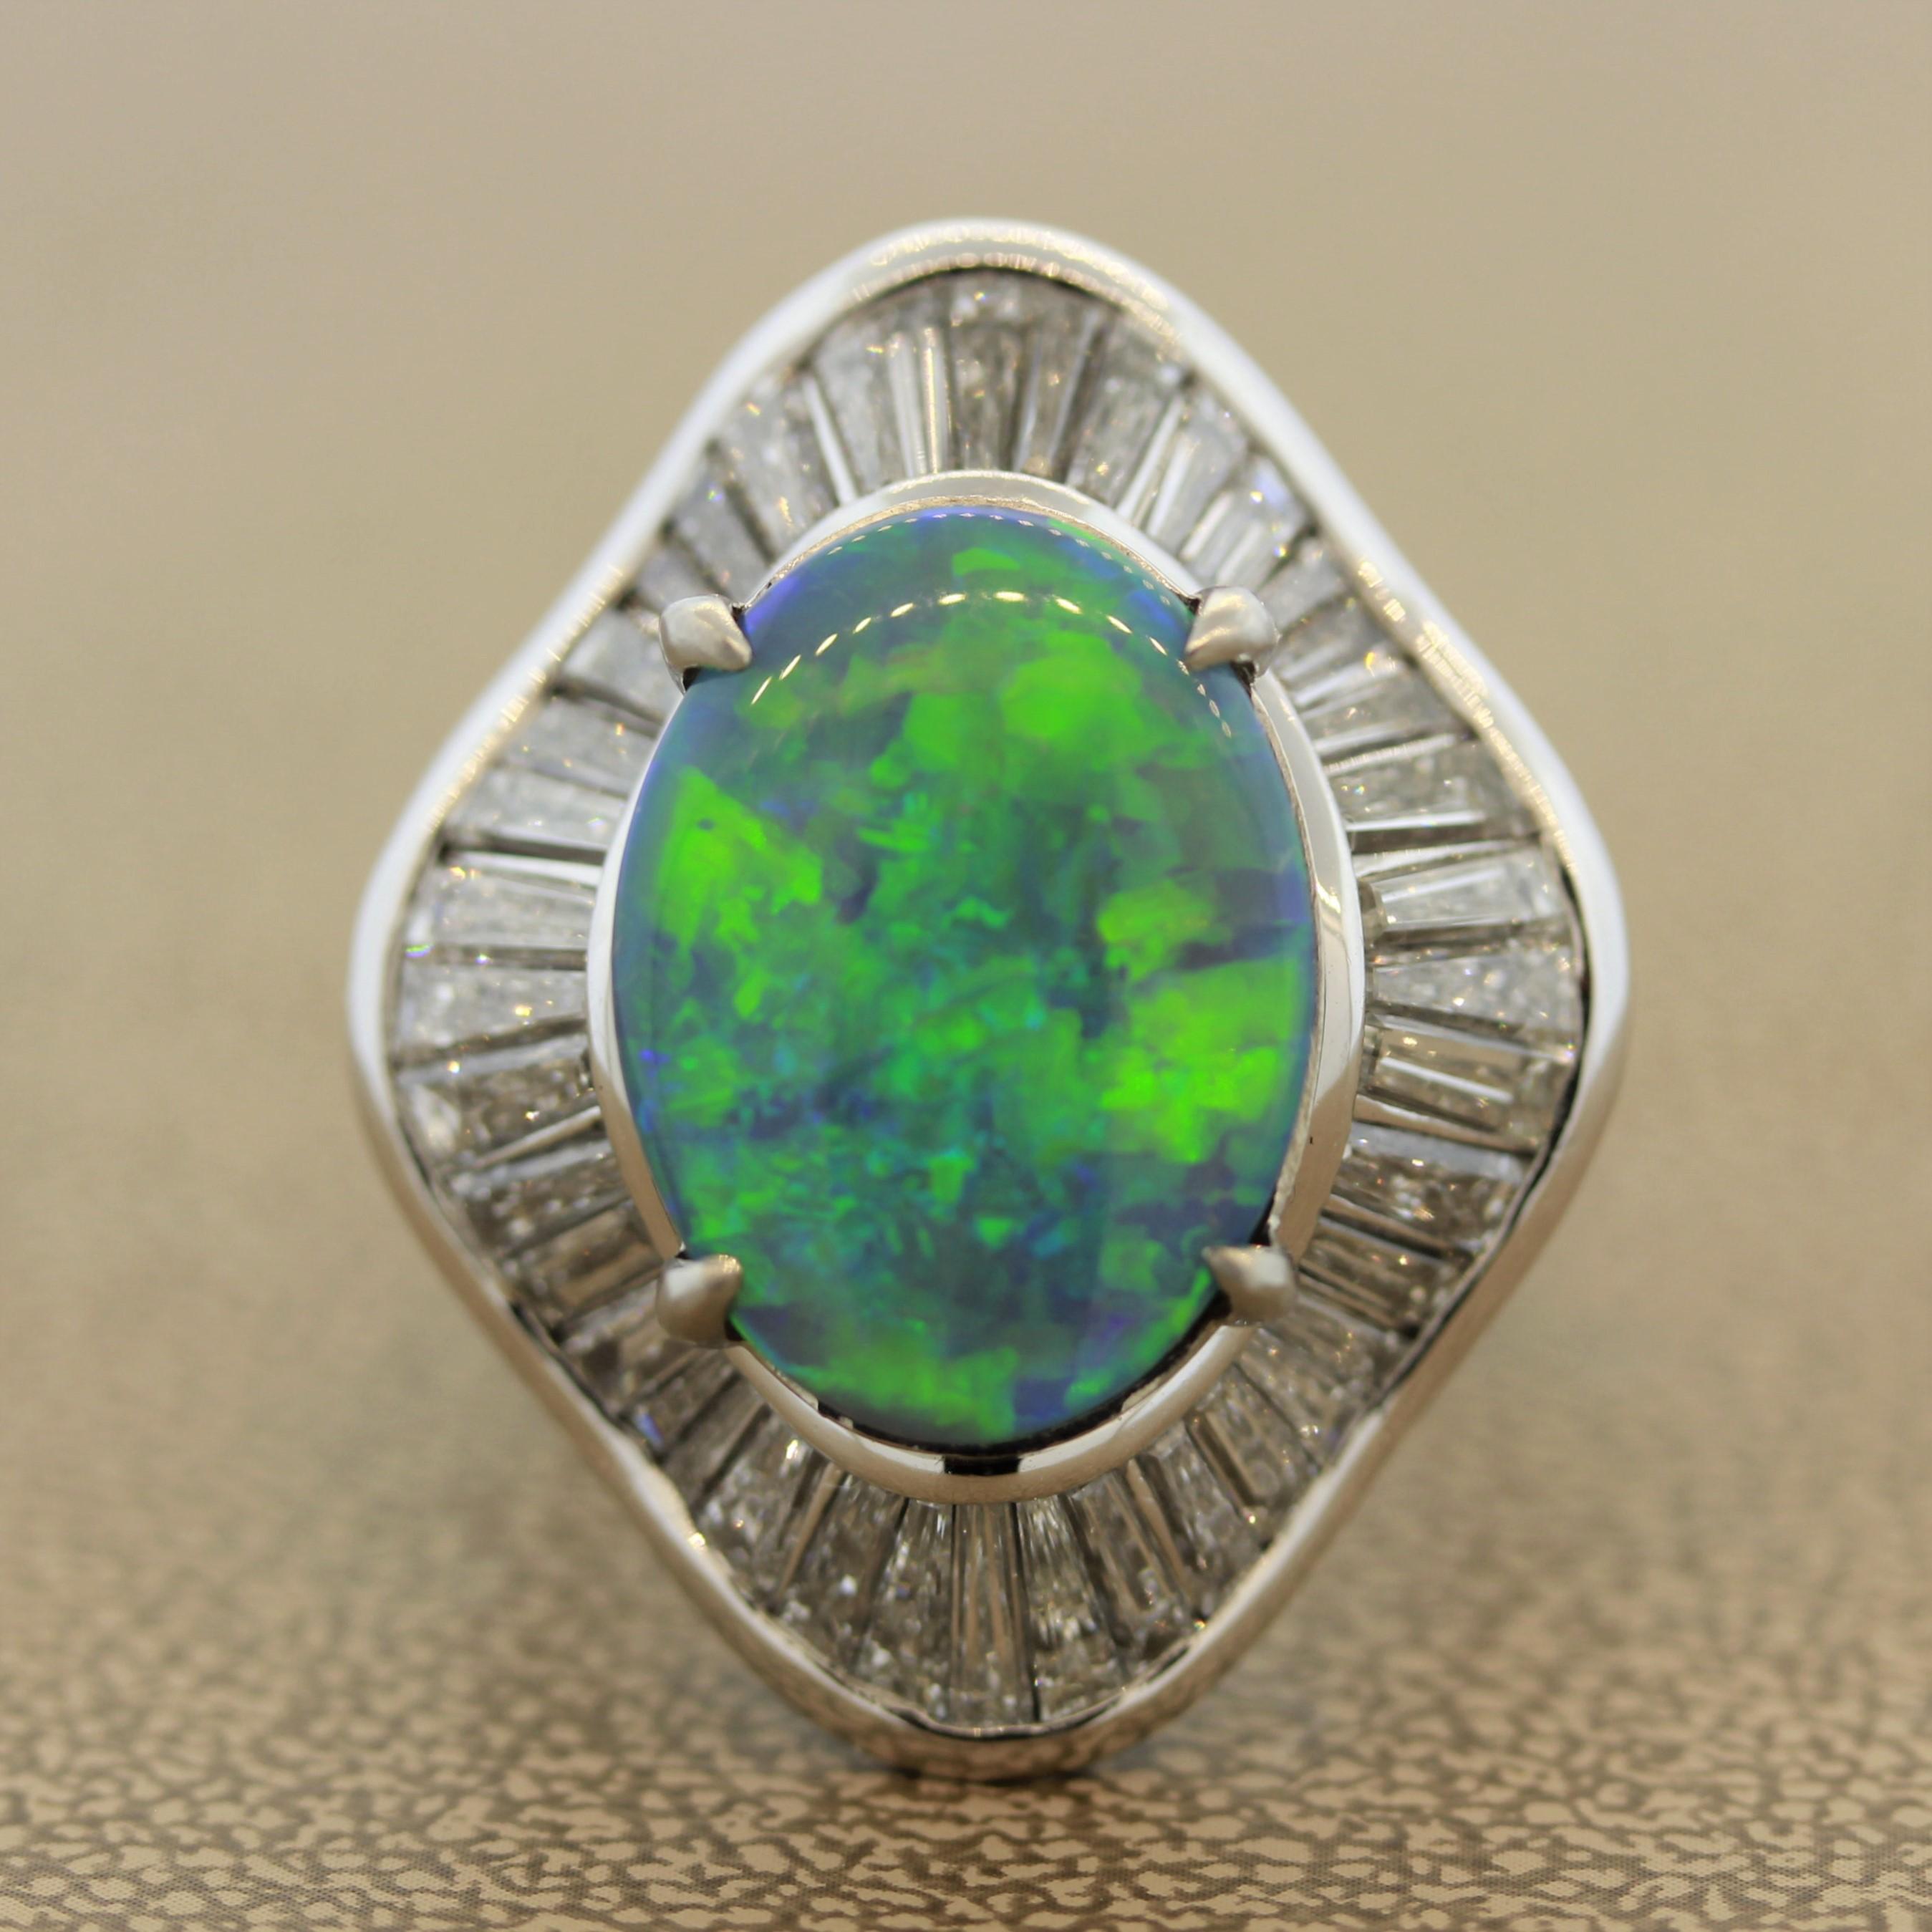 A superb gem quality example of a fine Australian opal. Most likely from a mine in Lightning Ridge, this opal has excellent play of color with bright flashes of predominantly green and blue. It weighs 7.39 carats and was beautifully cut as a classic